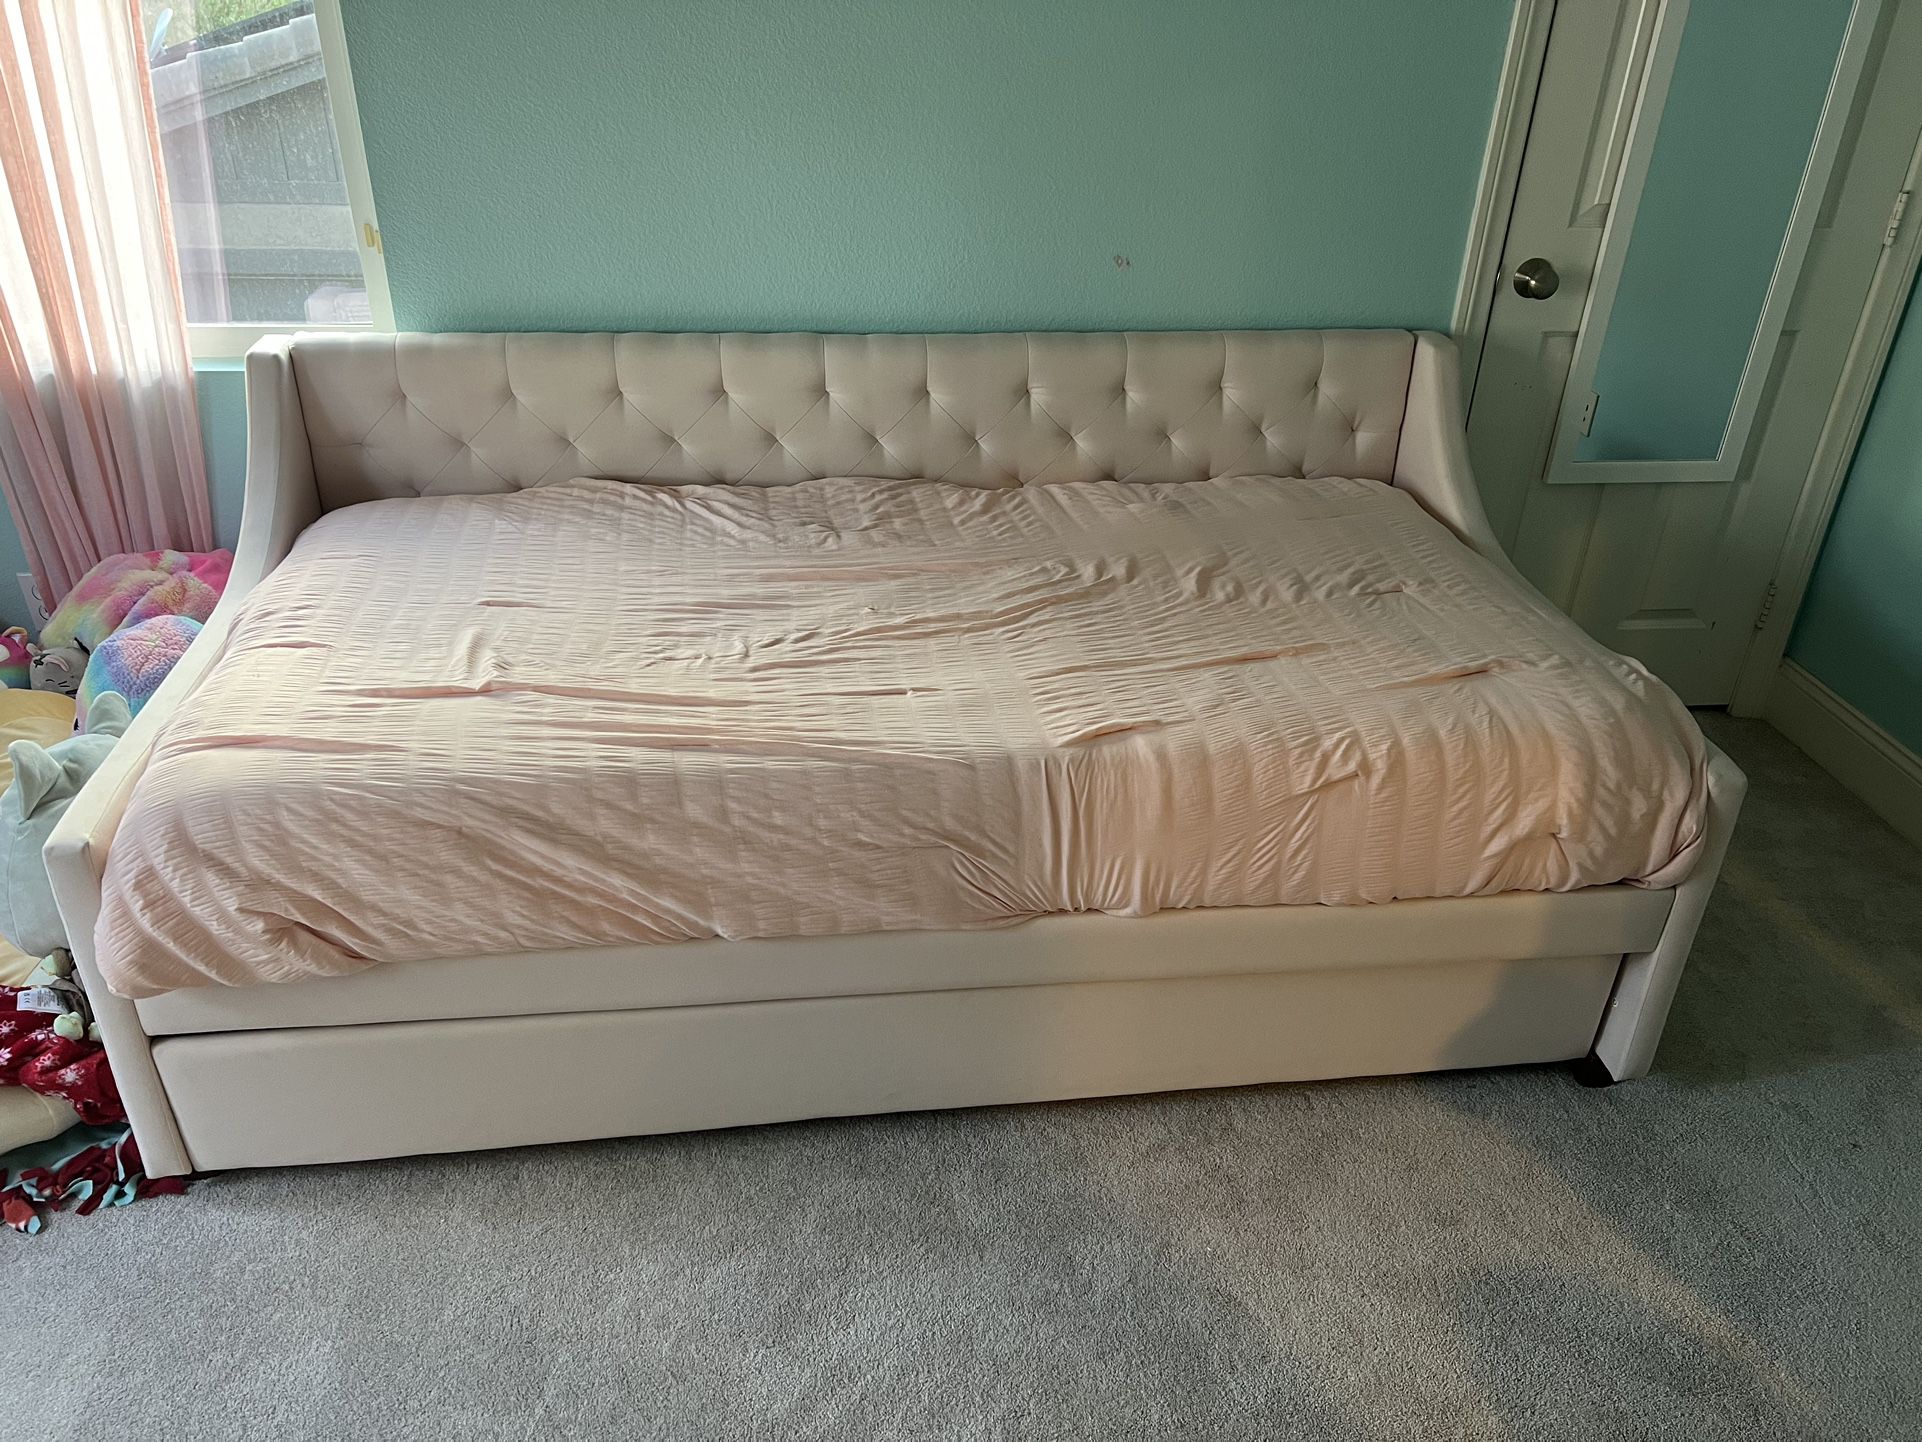 Girls Trundle Bed (twin)